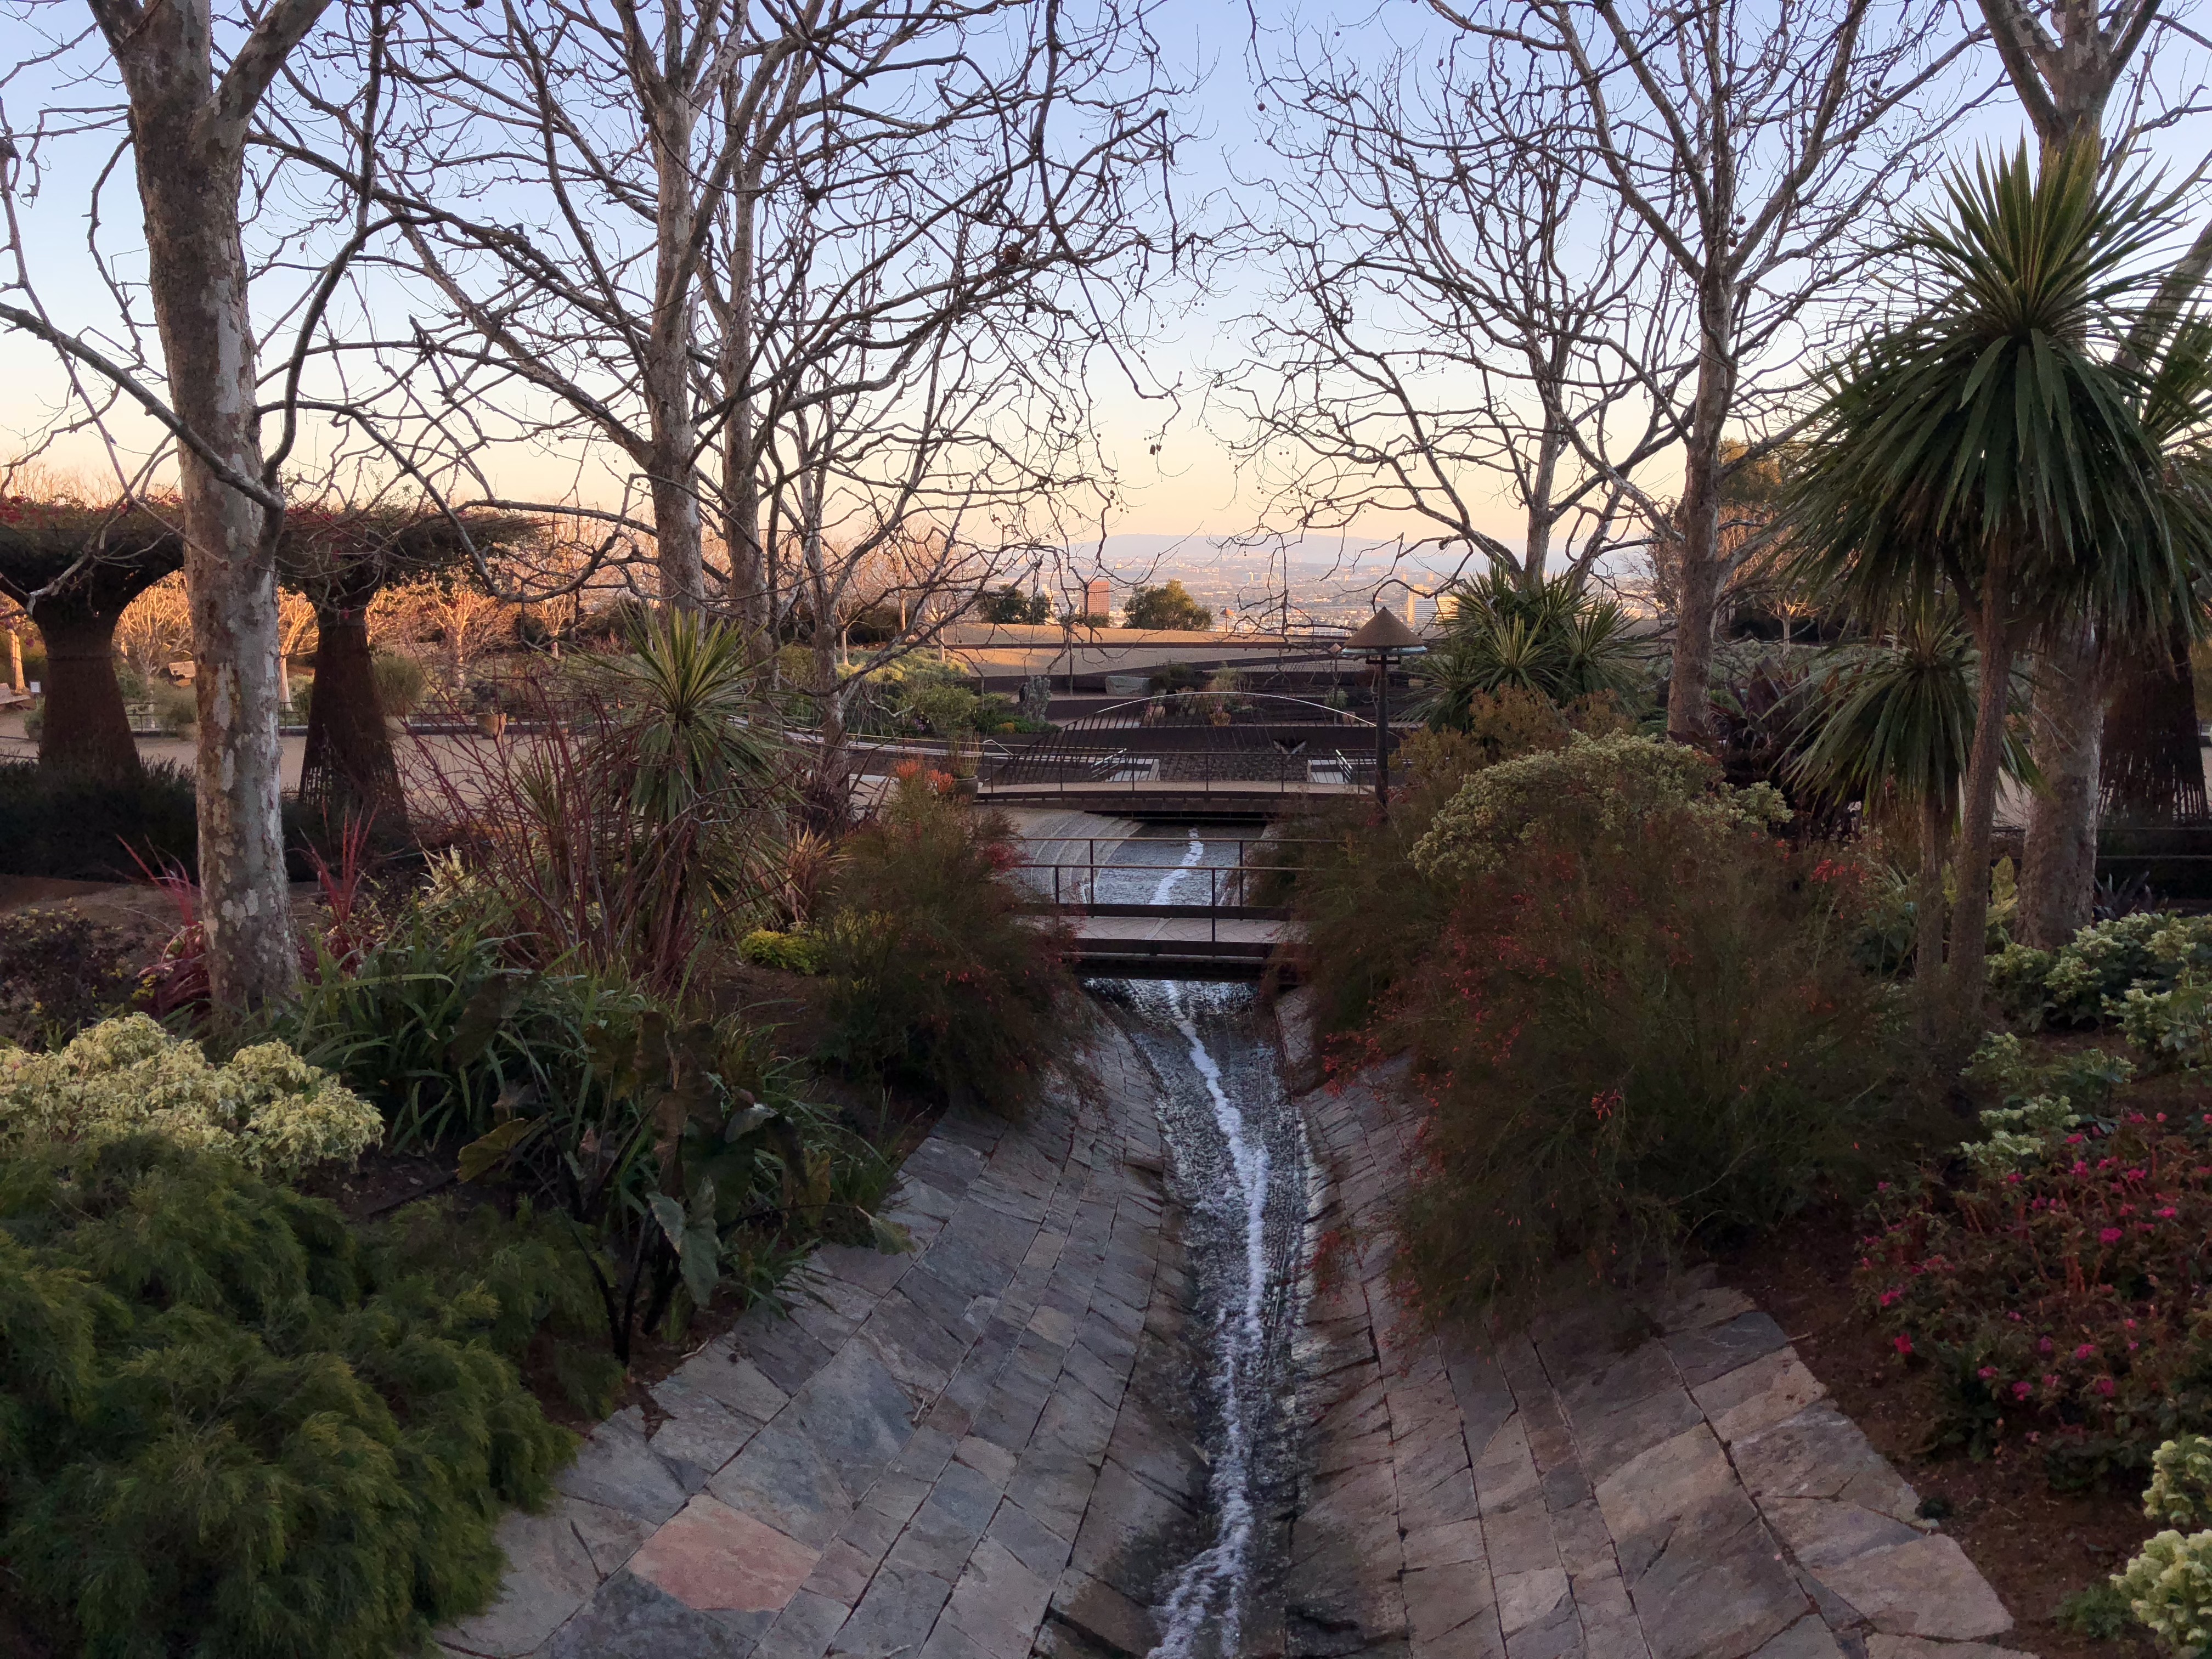 Sunset at the Getty Center